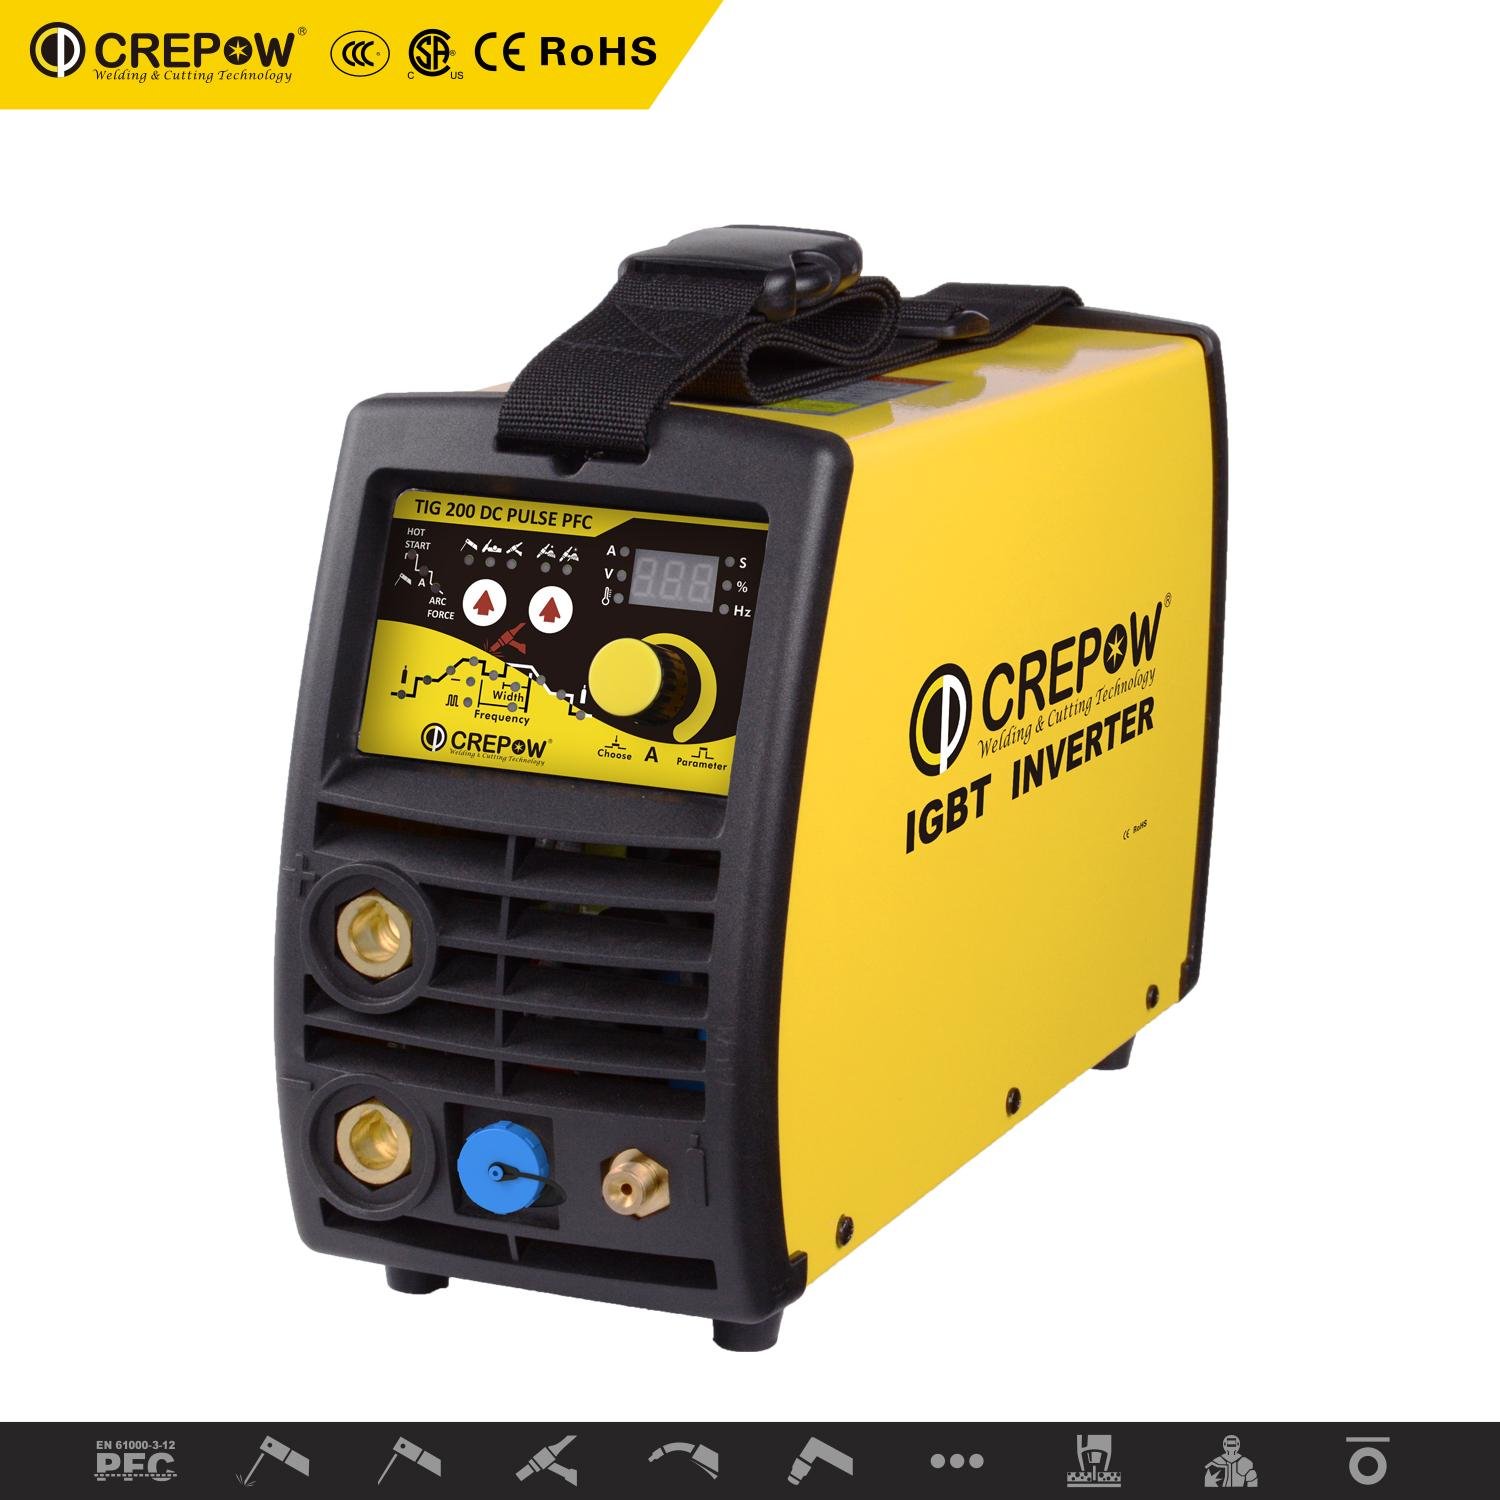  Crepow Inverter TIG200 DC PULSED PFC with DC TIG & MMA 2